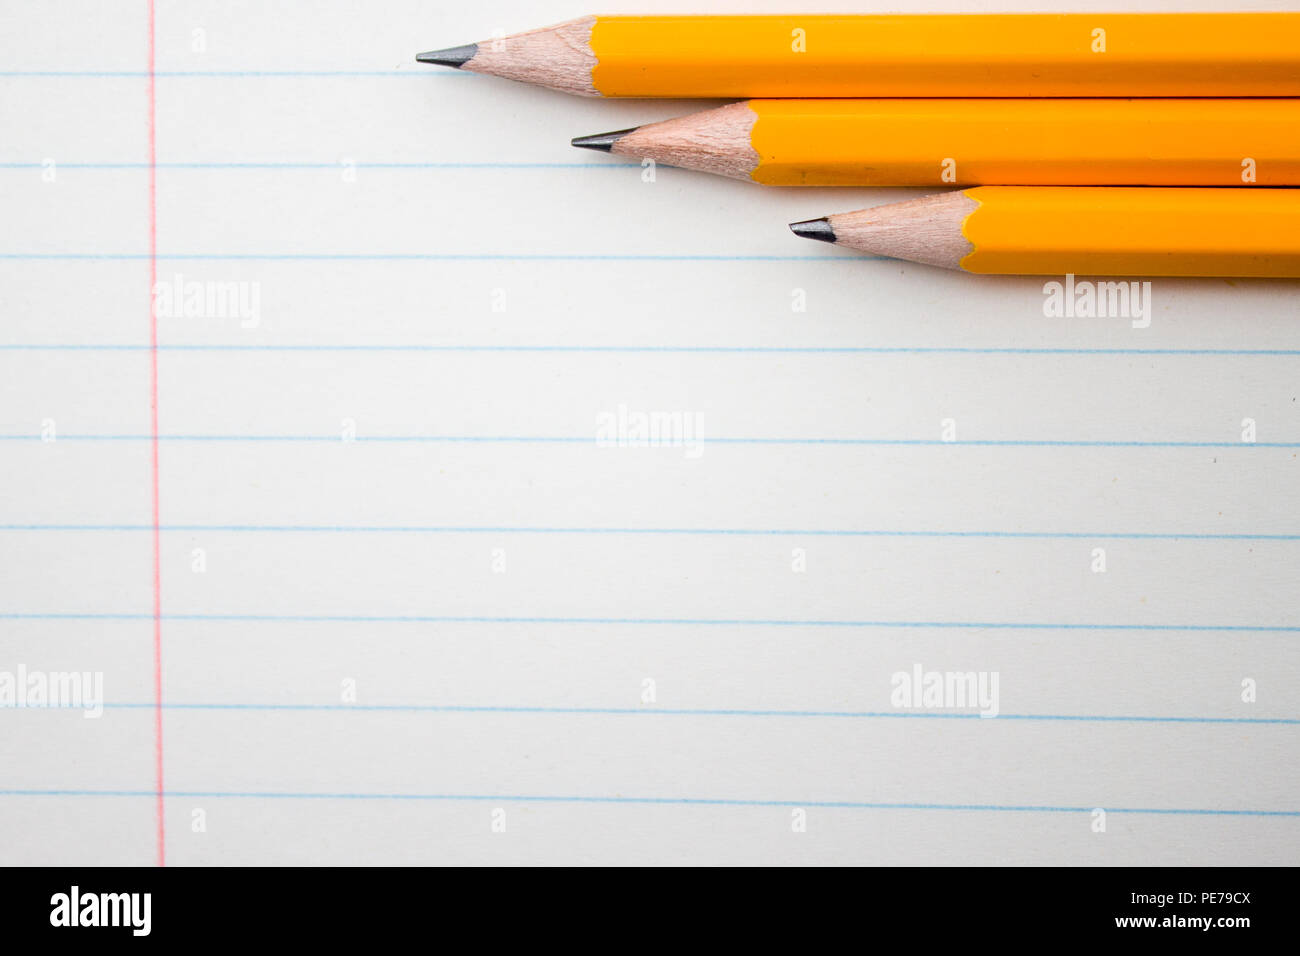 Back to school, education concept - orange pencils close up and composition book on background for educational new academic year begin or study term Stock Photo